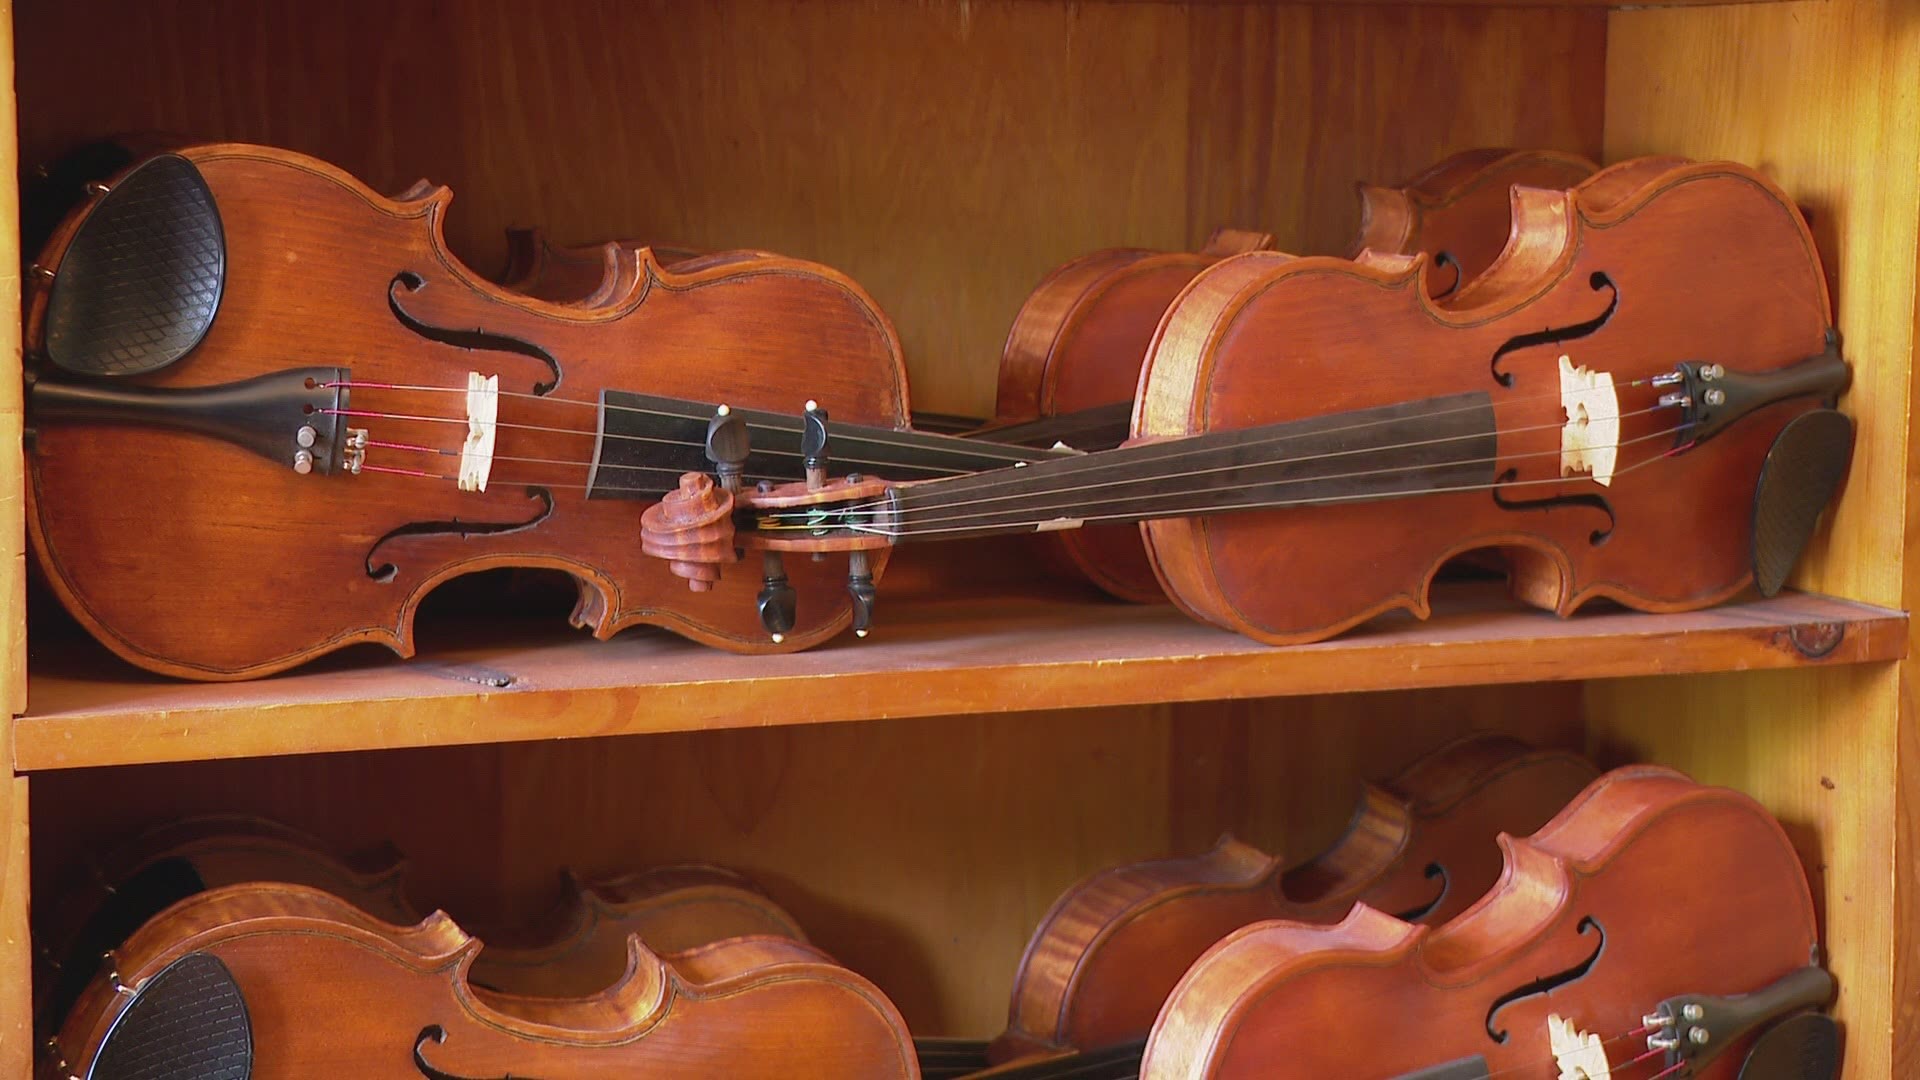 Edwin Hendrickson started hand-making violins 10 years ago. He had no idea how much of an impact his hobby would make on a school district a decade later.